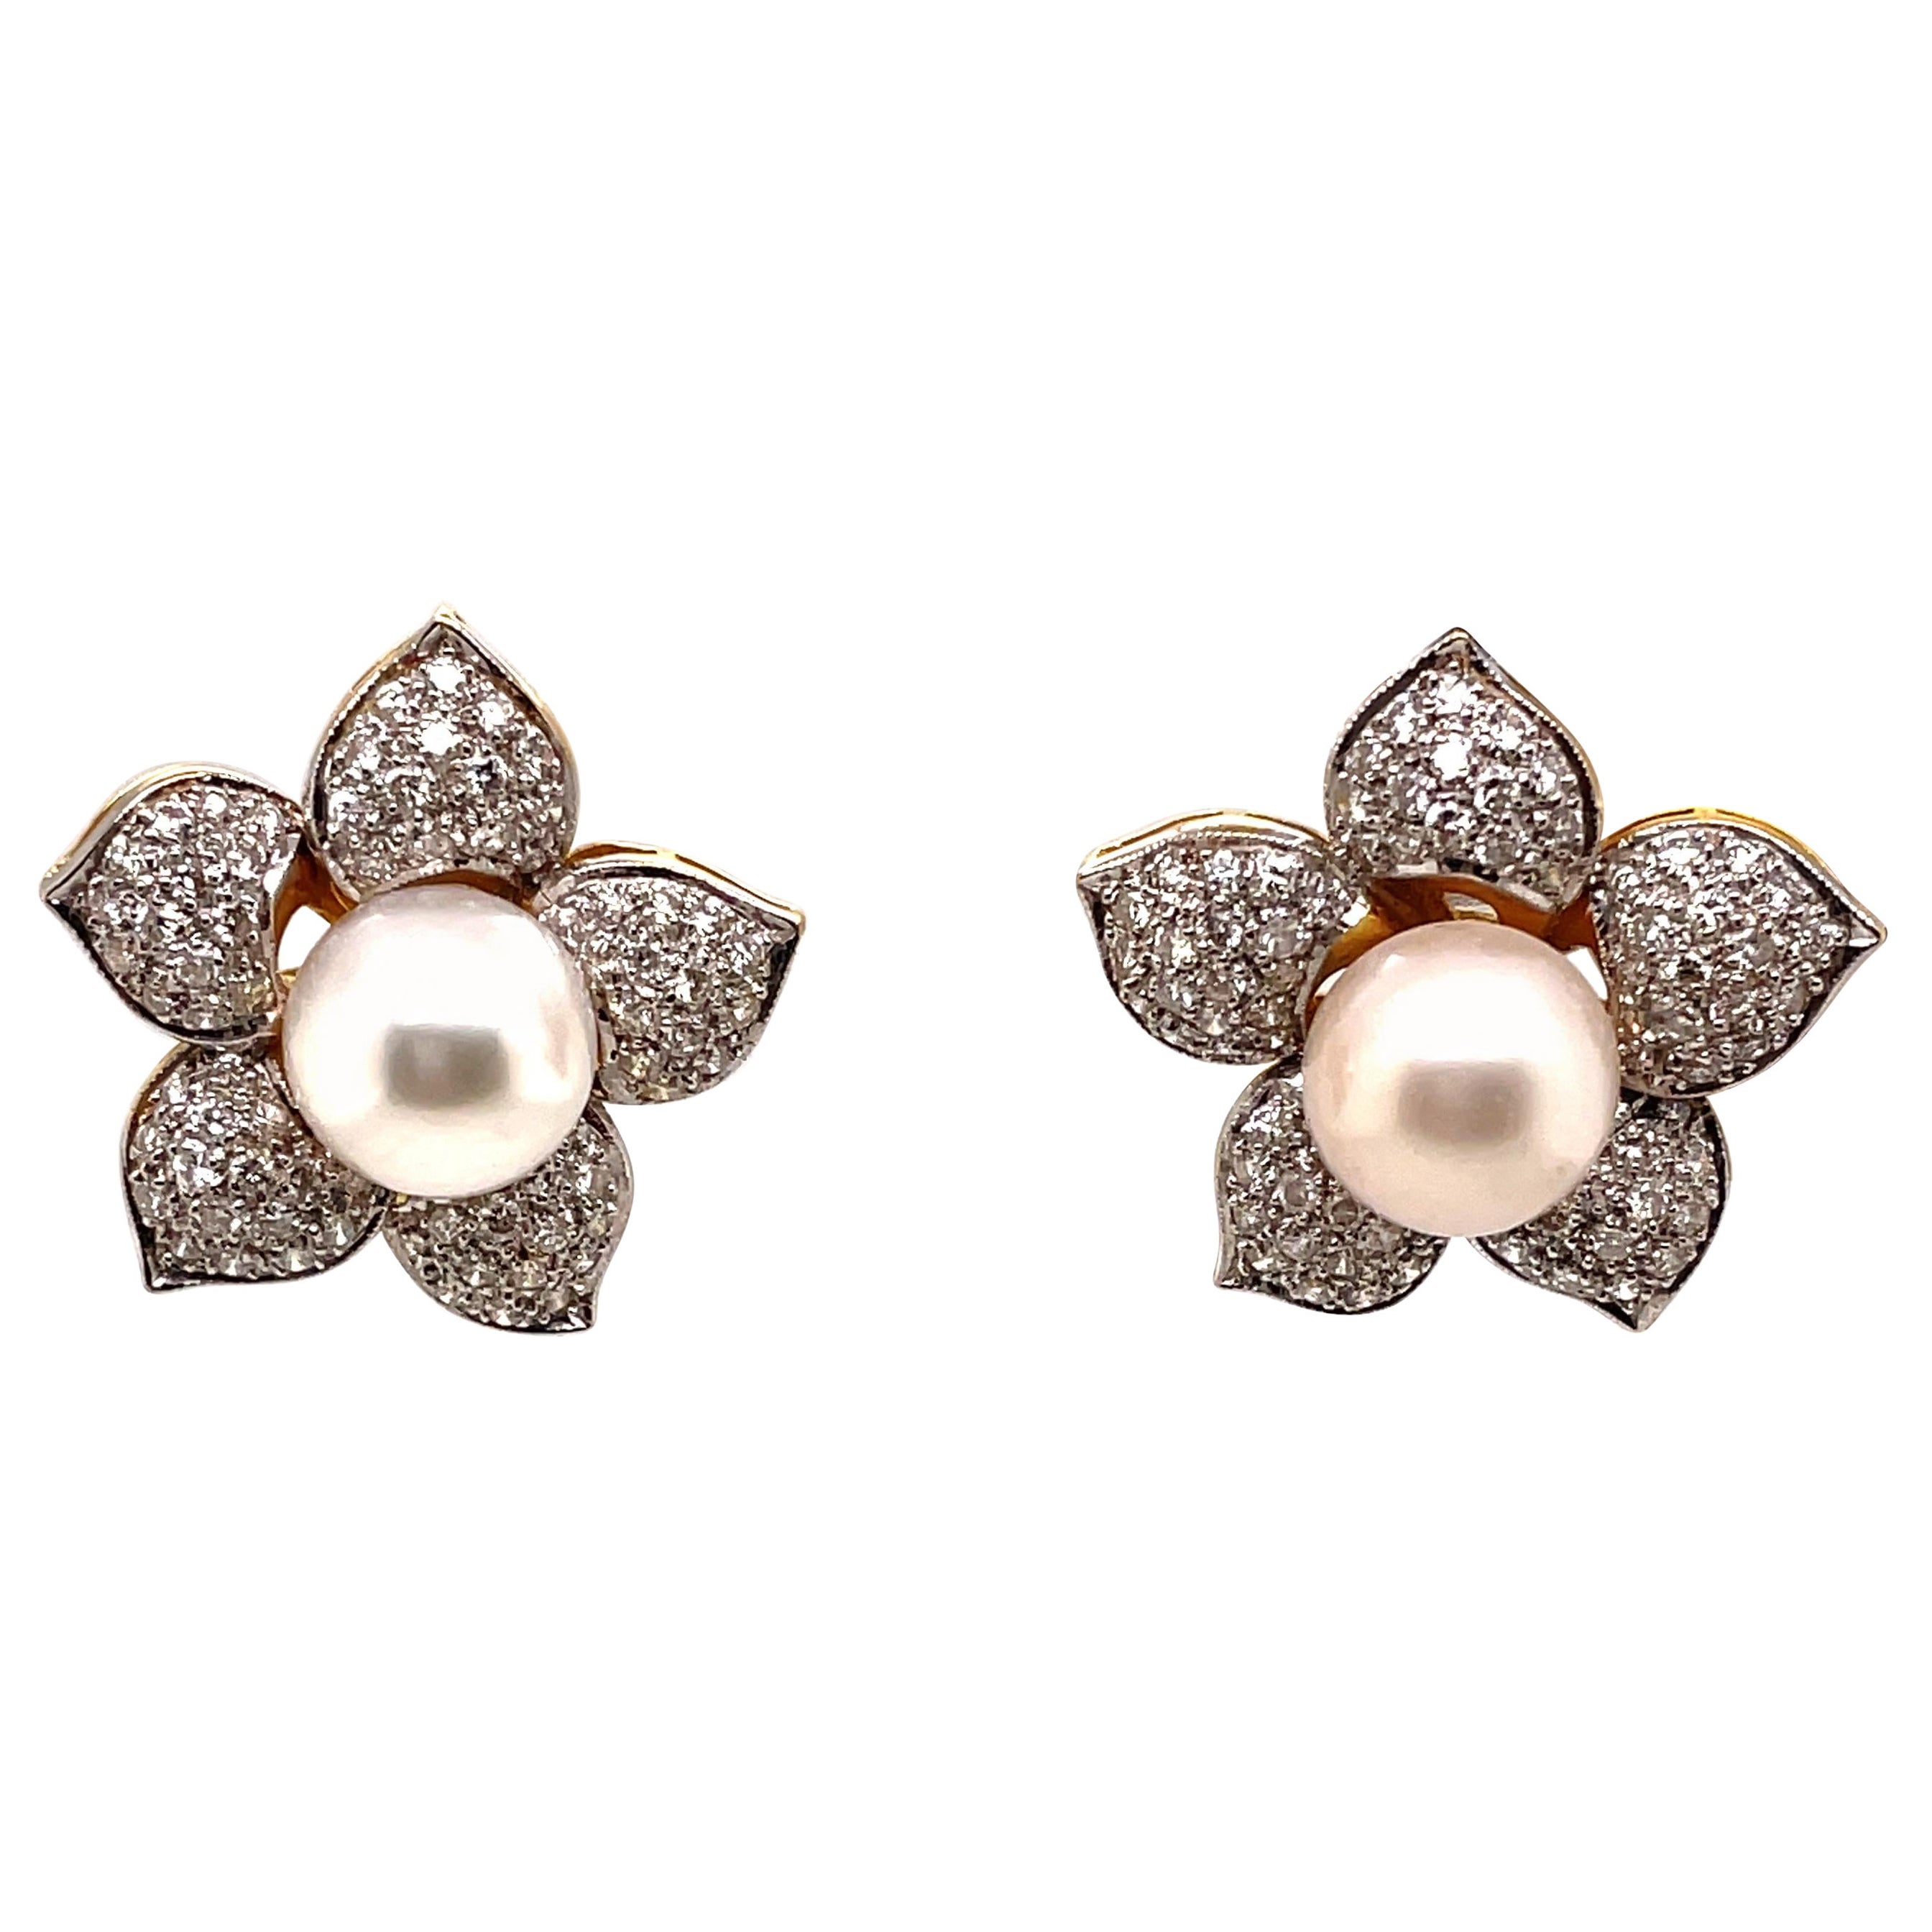 2ct Diamonds and Pearls Floral Stud Earrings White and Yellow Gold